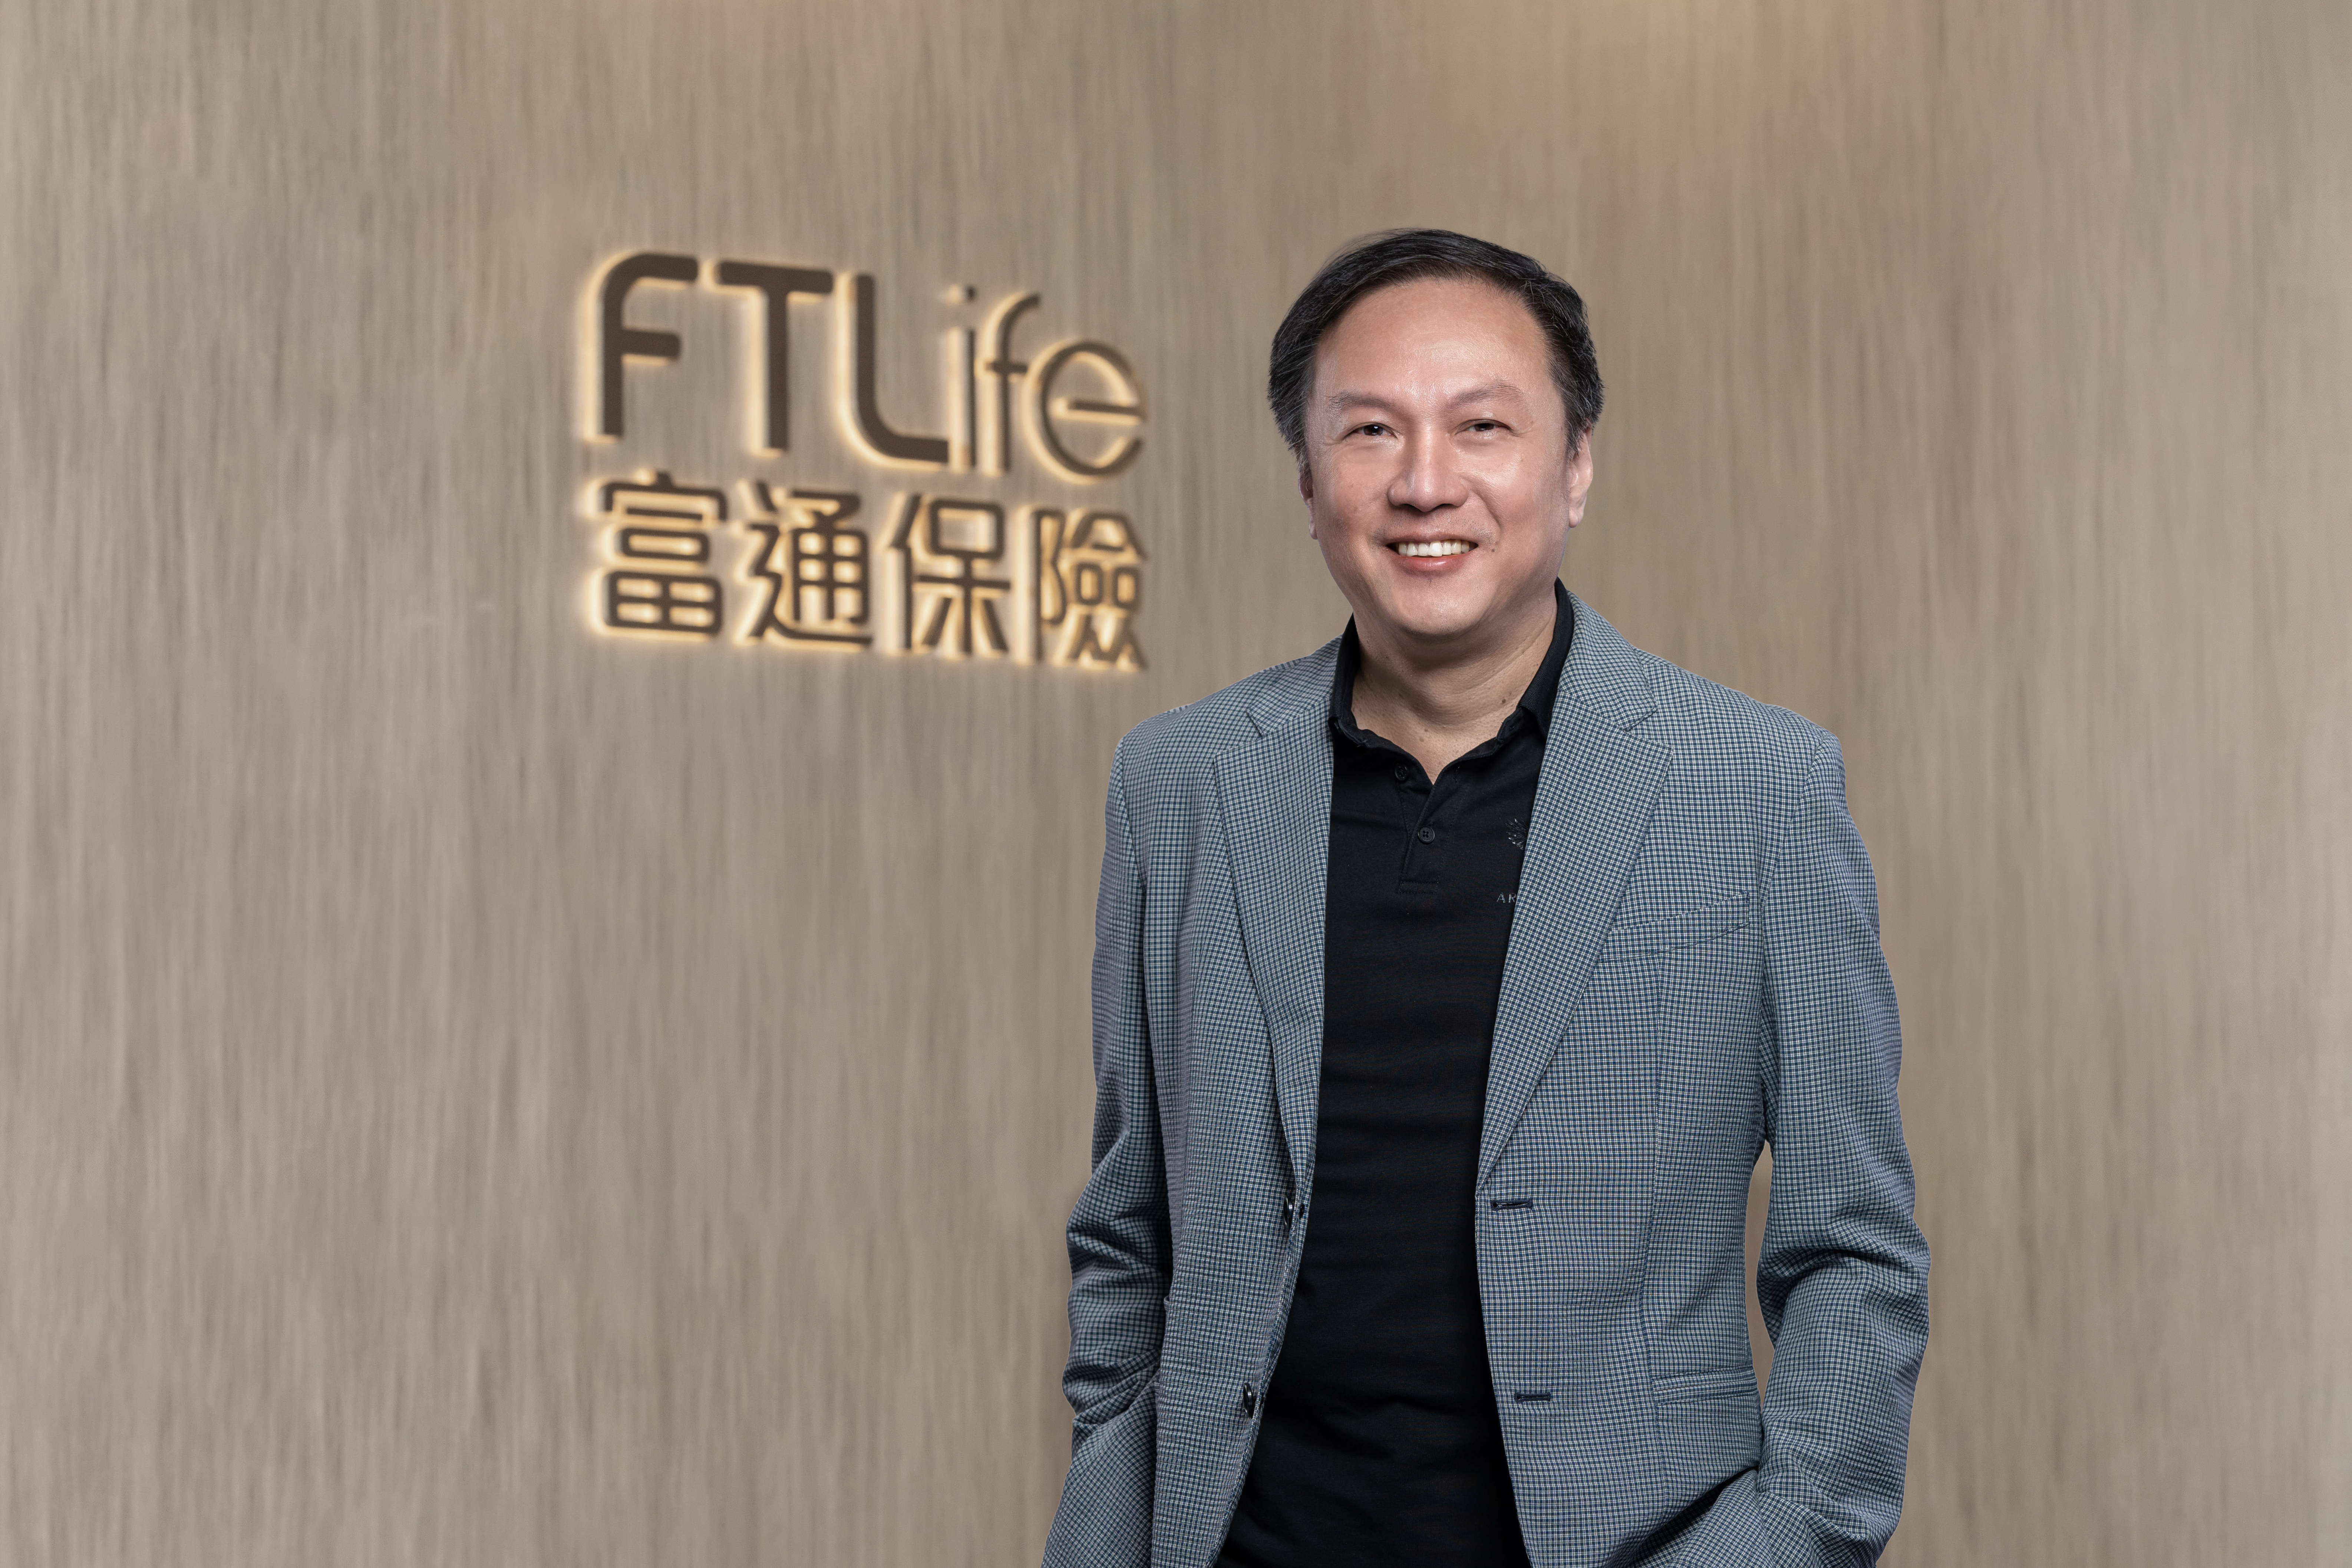 Man Kit Ip, Chief Executive Officer of FTLife